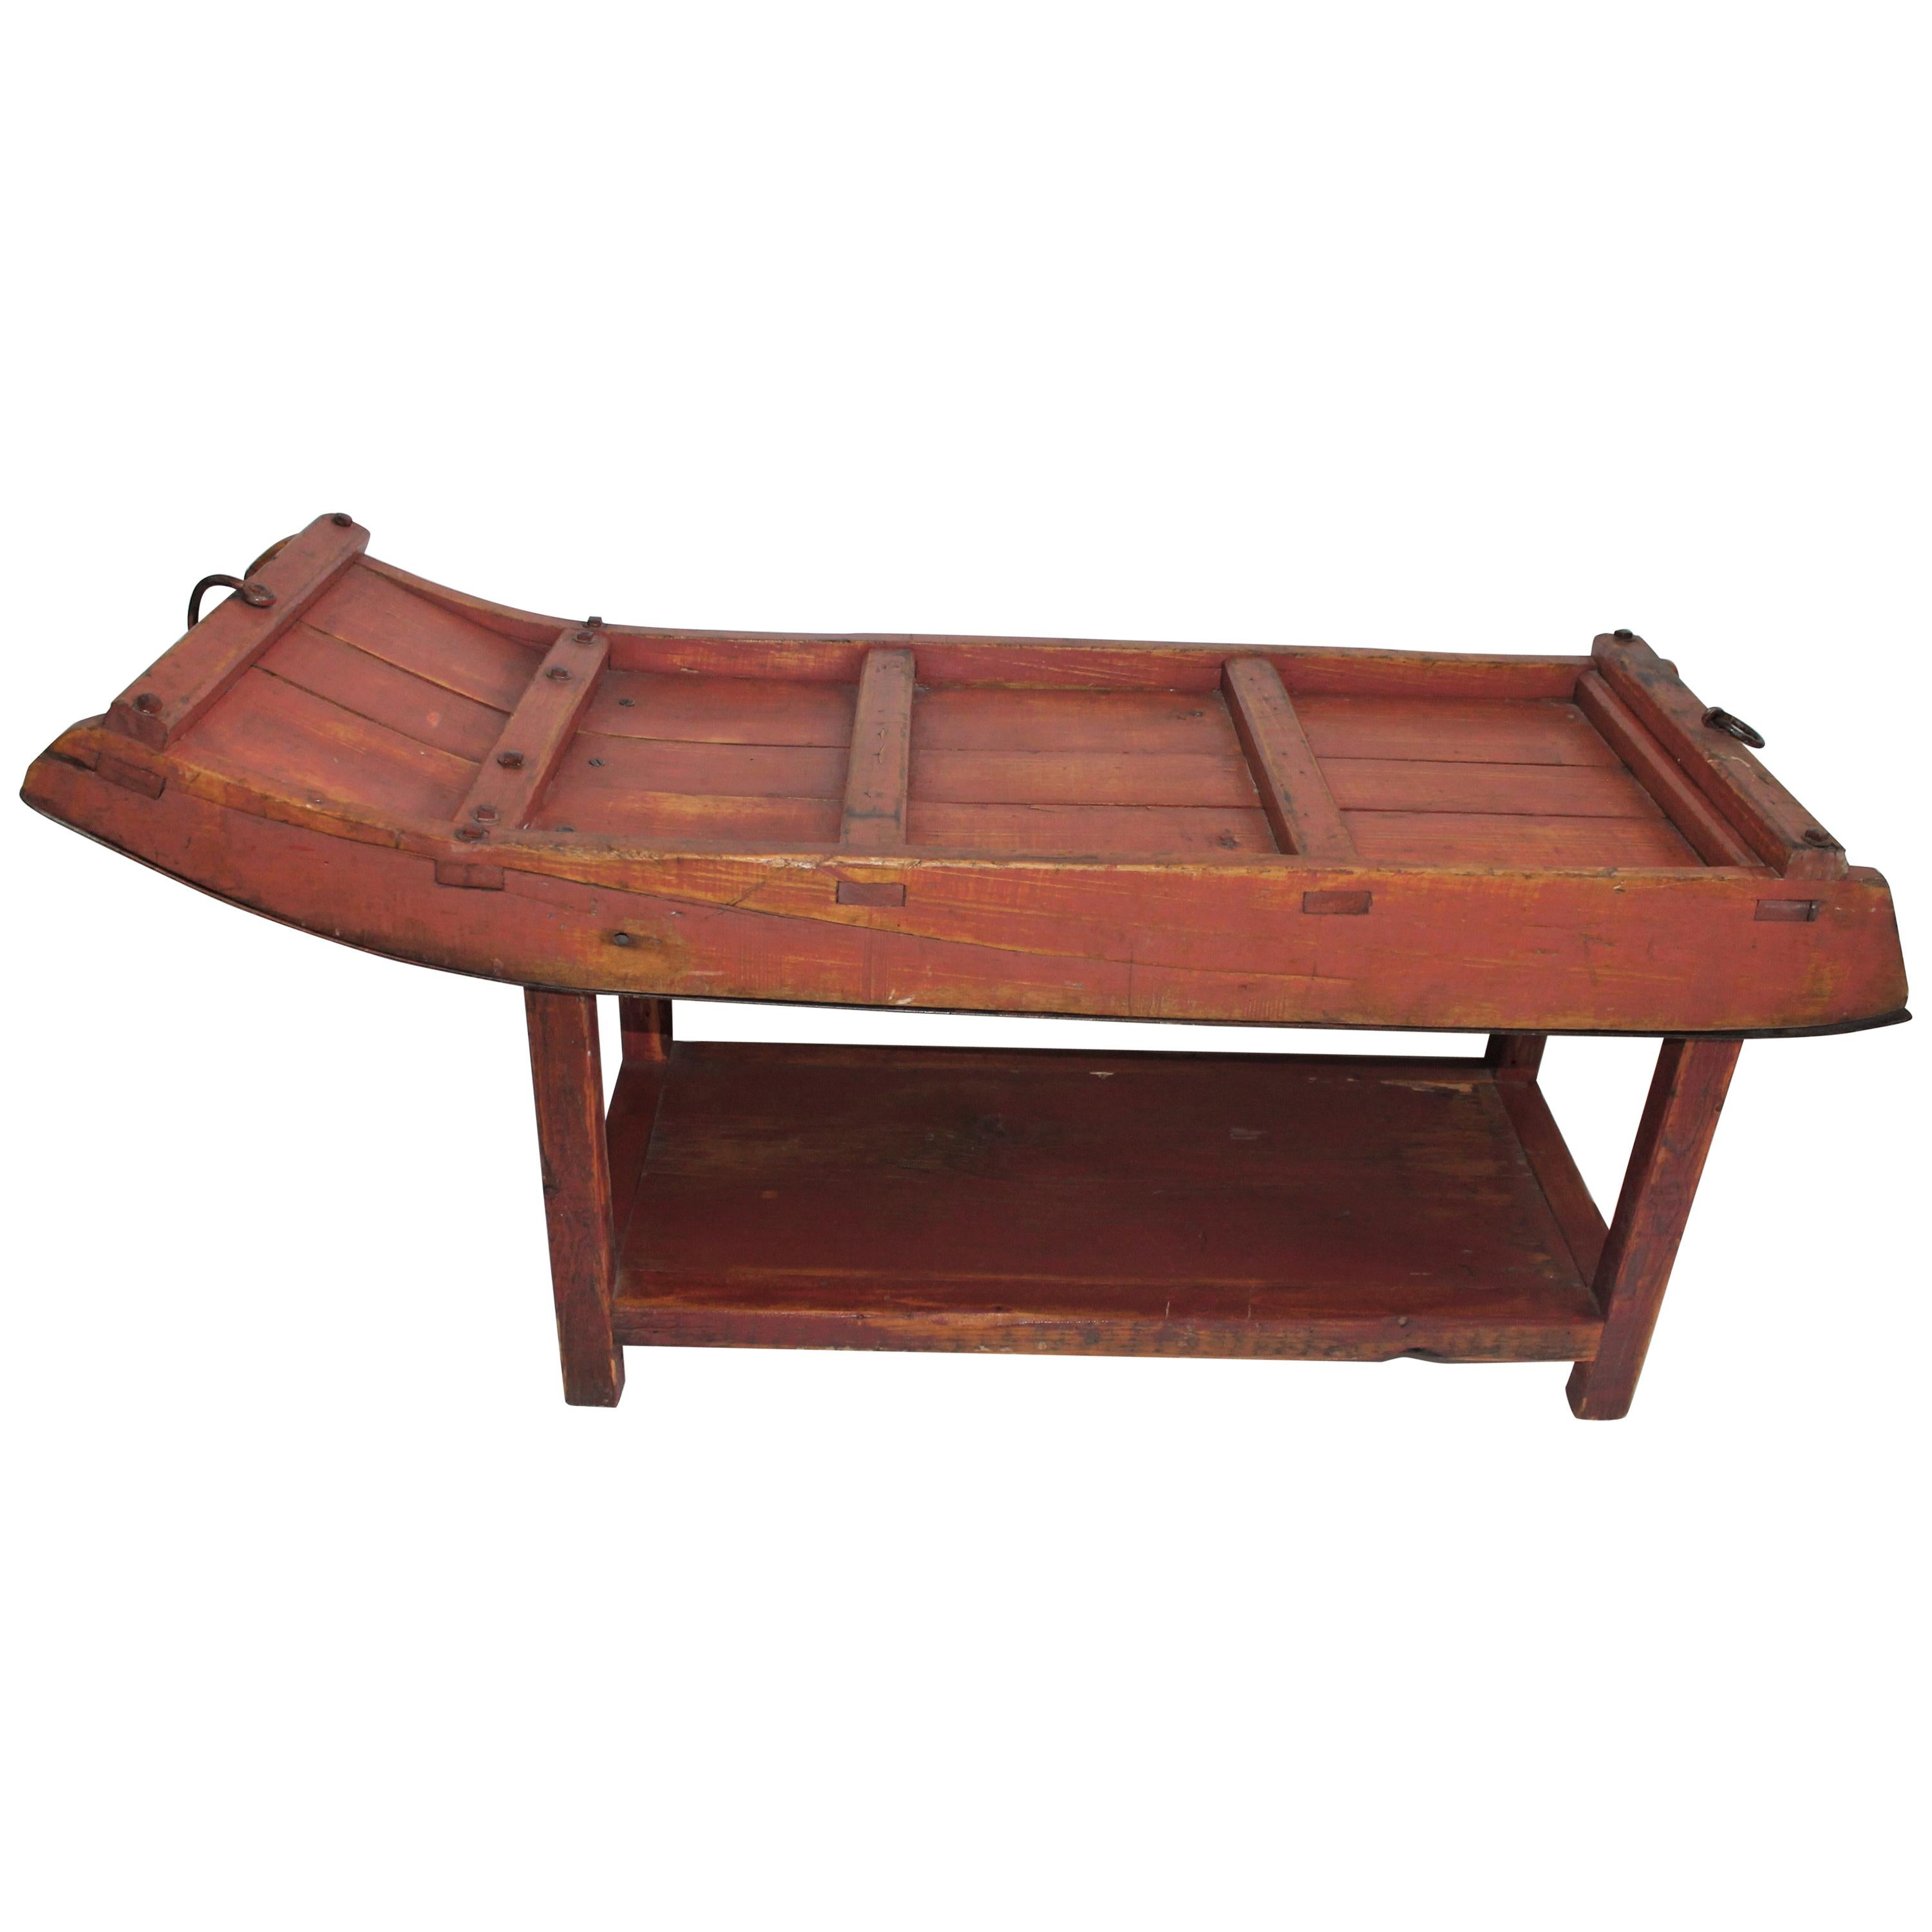 19th Century Red Painted Sled / Coffee Table